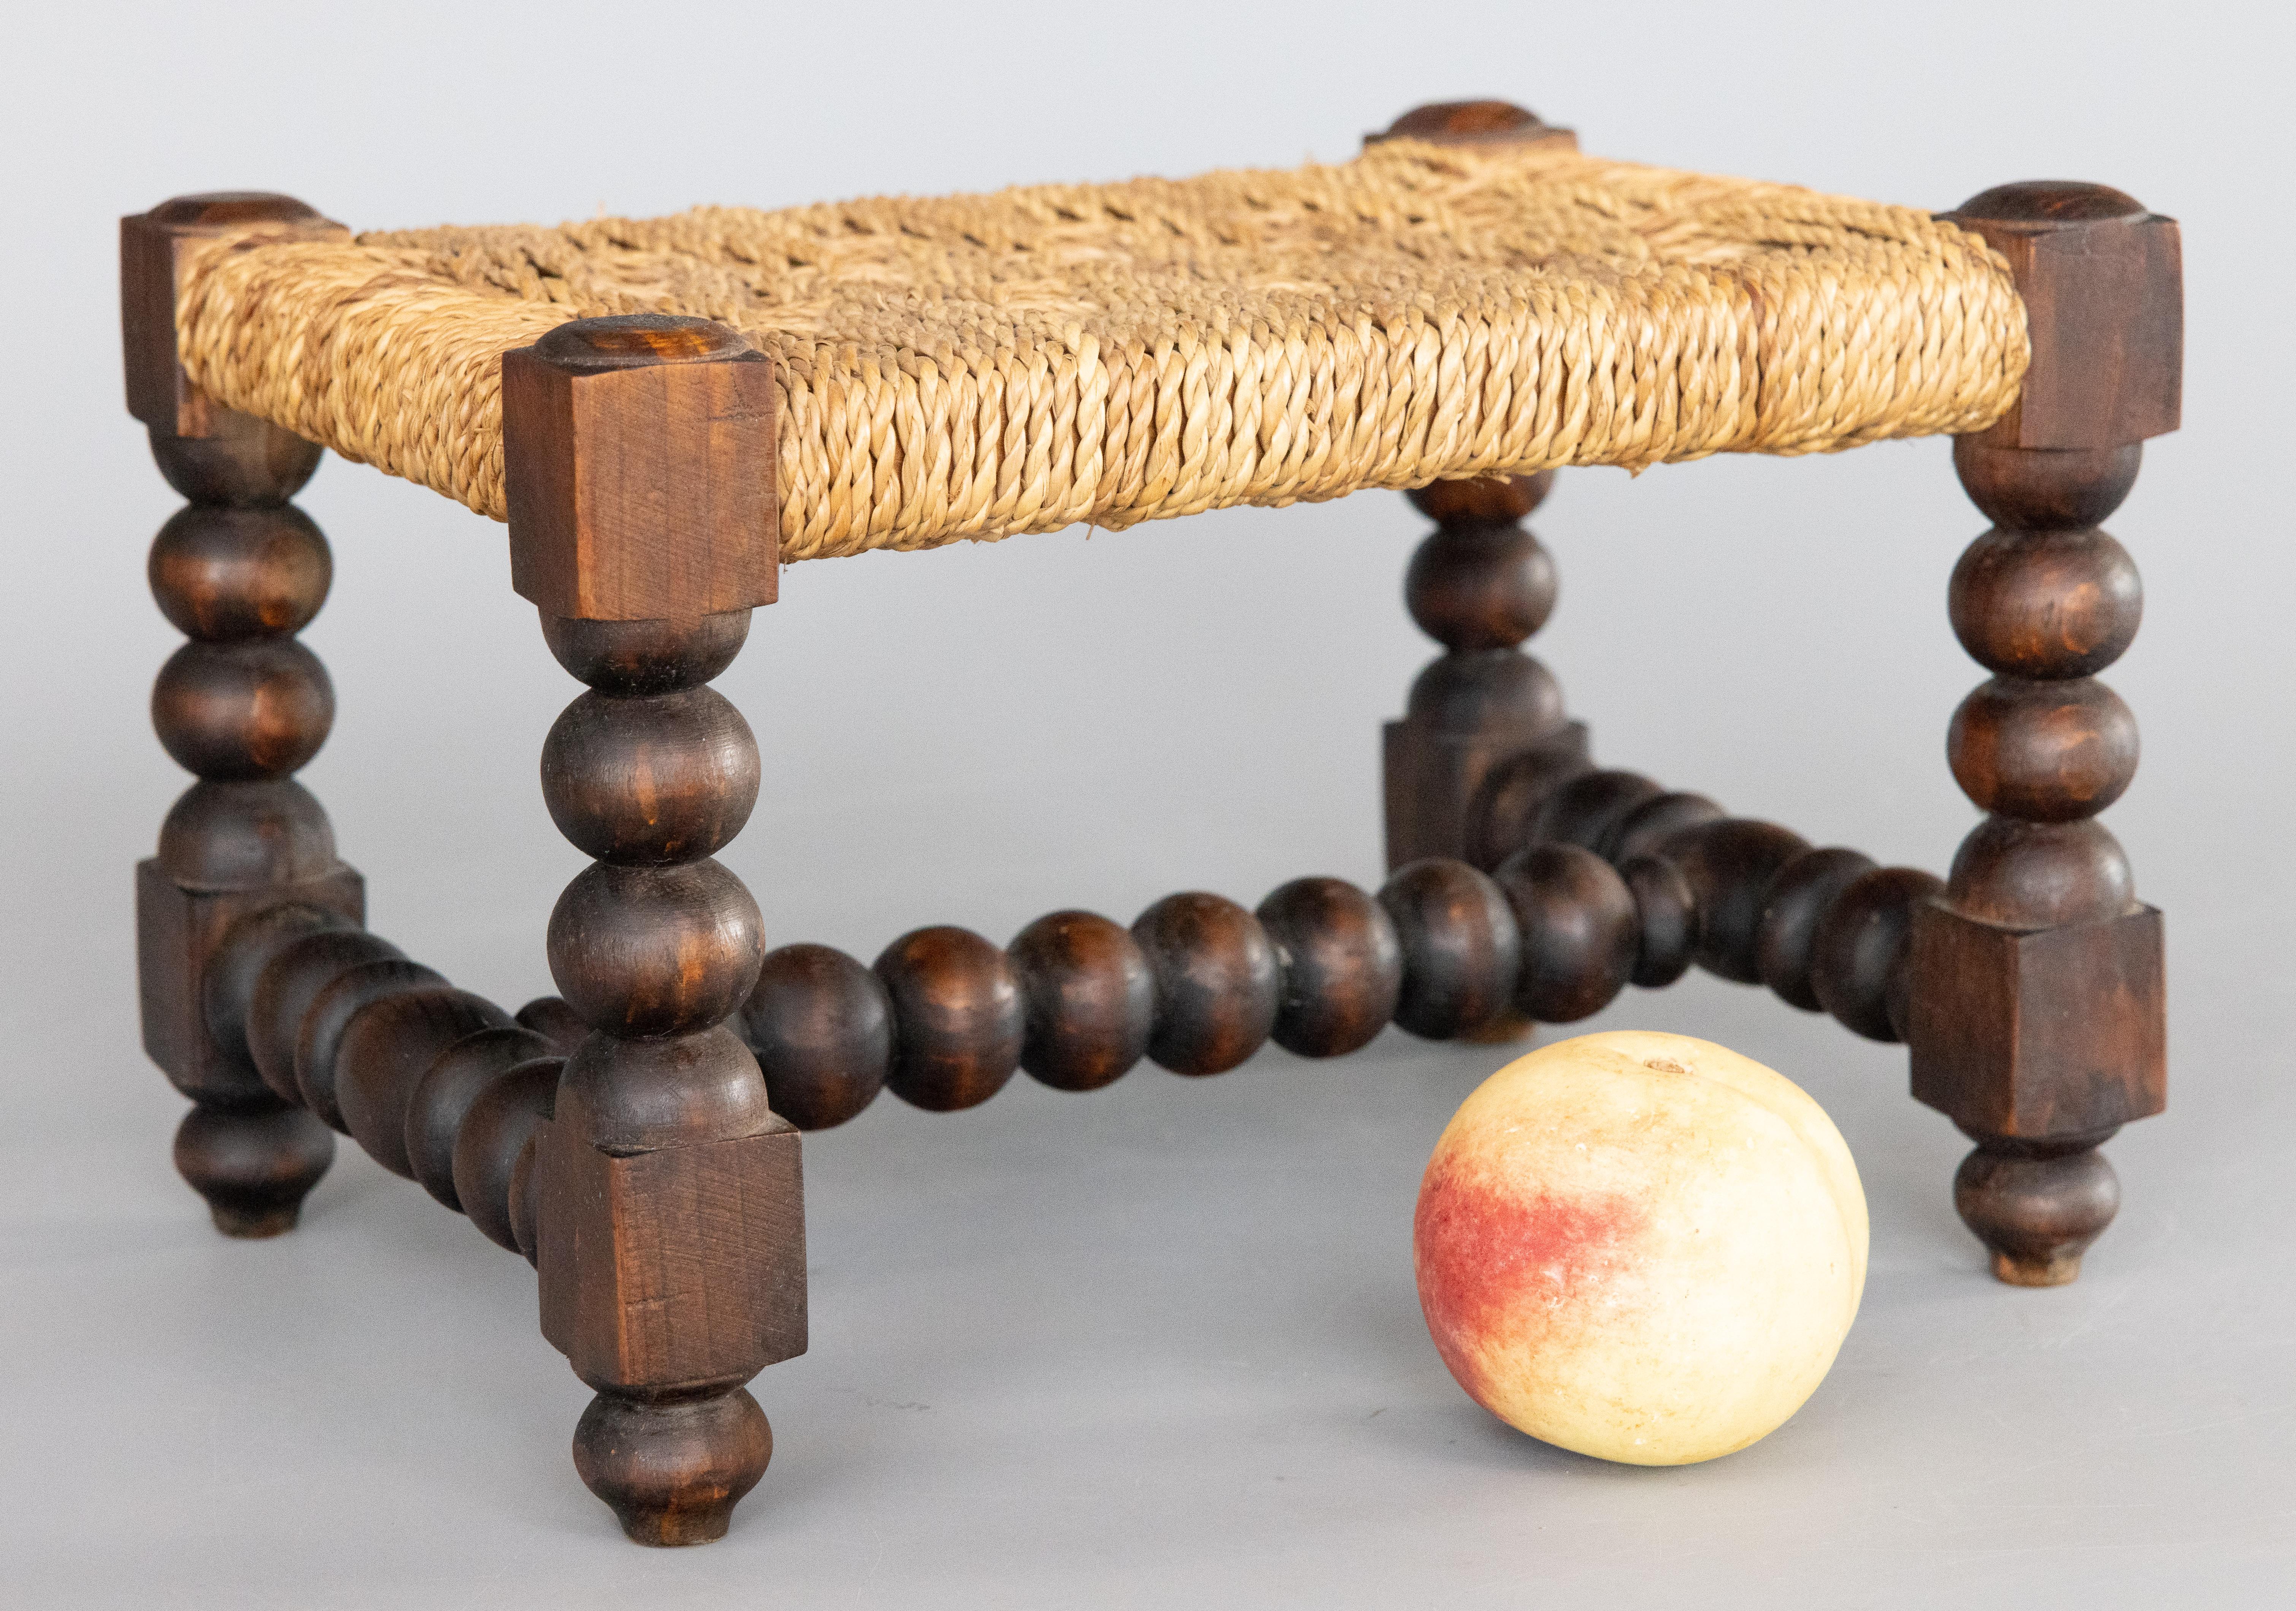 Antique Petite English Oak Woven Cord Rope Footstool Riser or Stand circa 1920 For Sale 3